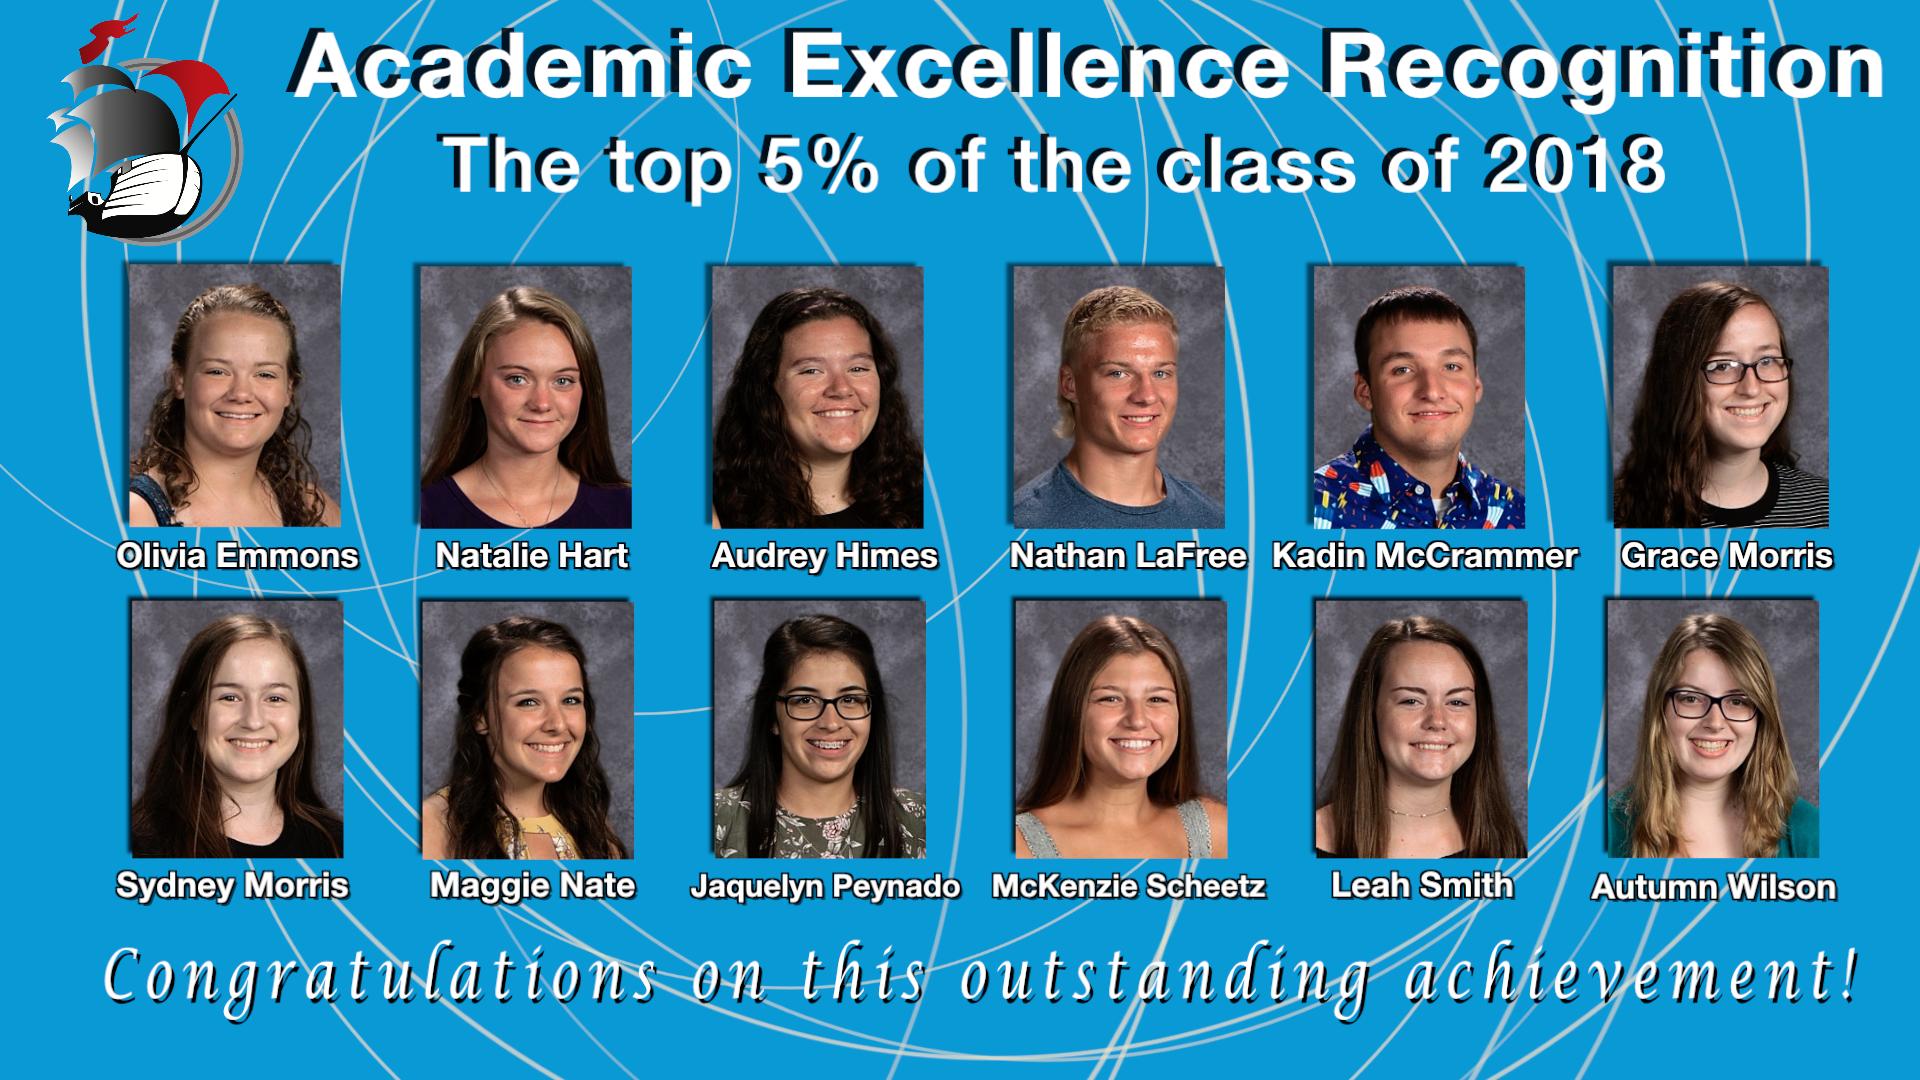 Academic Excellence Recognition-the top 5% of the class of 2018. Olivia Emmons, Natalie Hart, Audrey Himes, Nathan LaFree, Kadin McCrammer, Grace Morris, Sydney Morris, Maggie Nate, Jaquelyn Peynado, McKenzie Scheetz, Leah Smith, Autumn Wilson. Congratulations on this outstanding achievement!